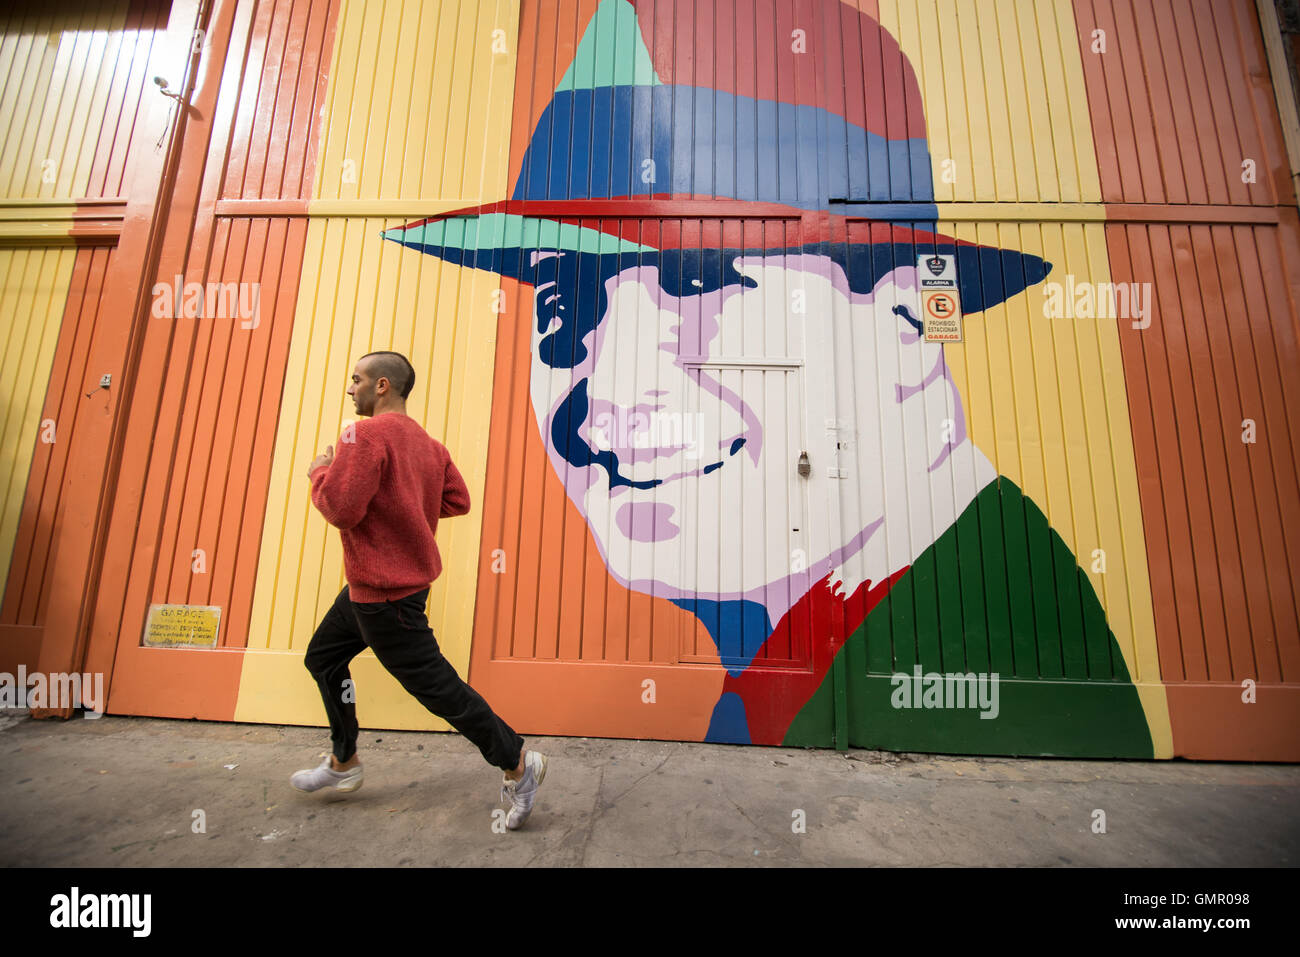 Buenos Aires, Argentina - 9 May 2016: Runner in front of a Carlos Gardel graffiti in Abastos district. Stock Photo